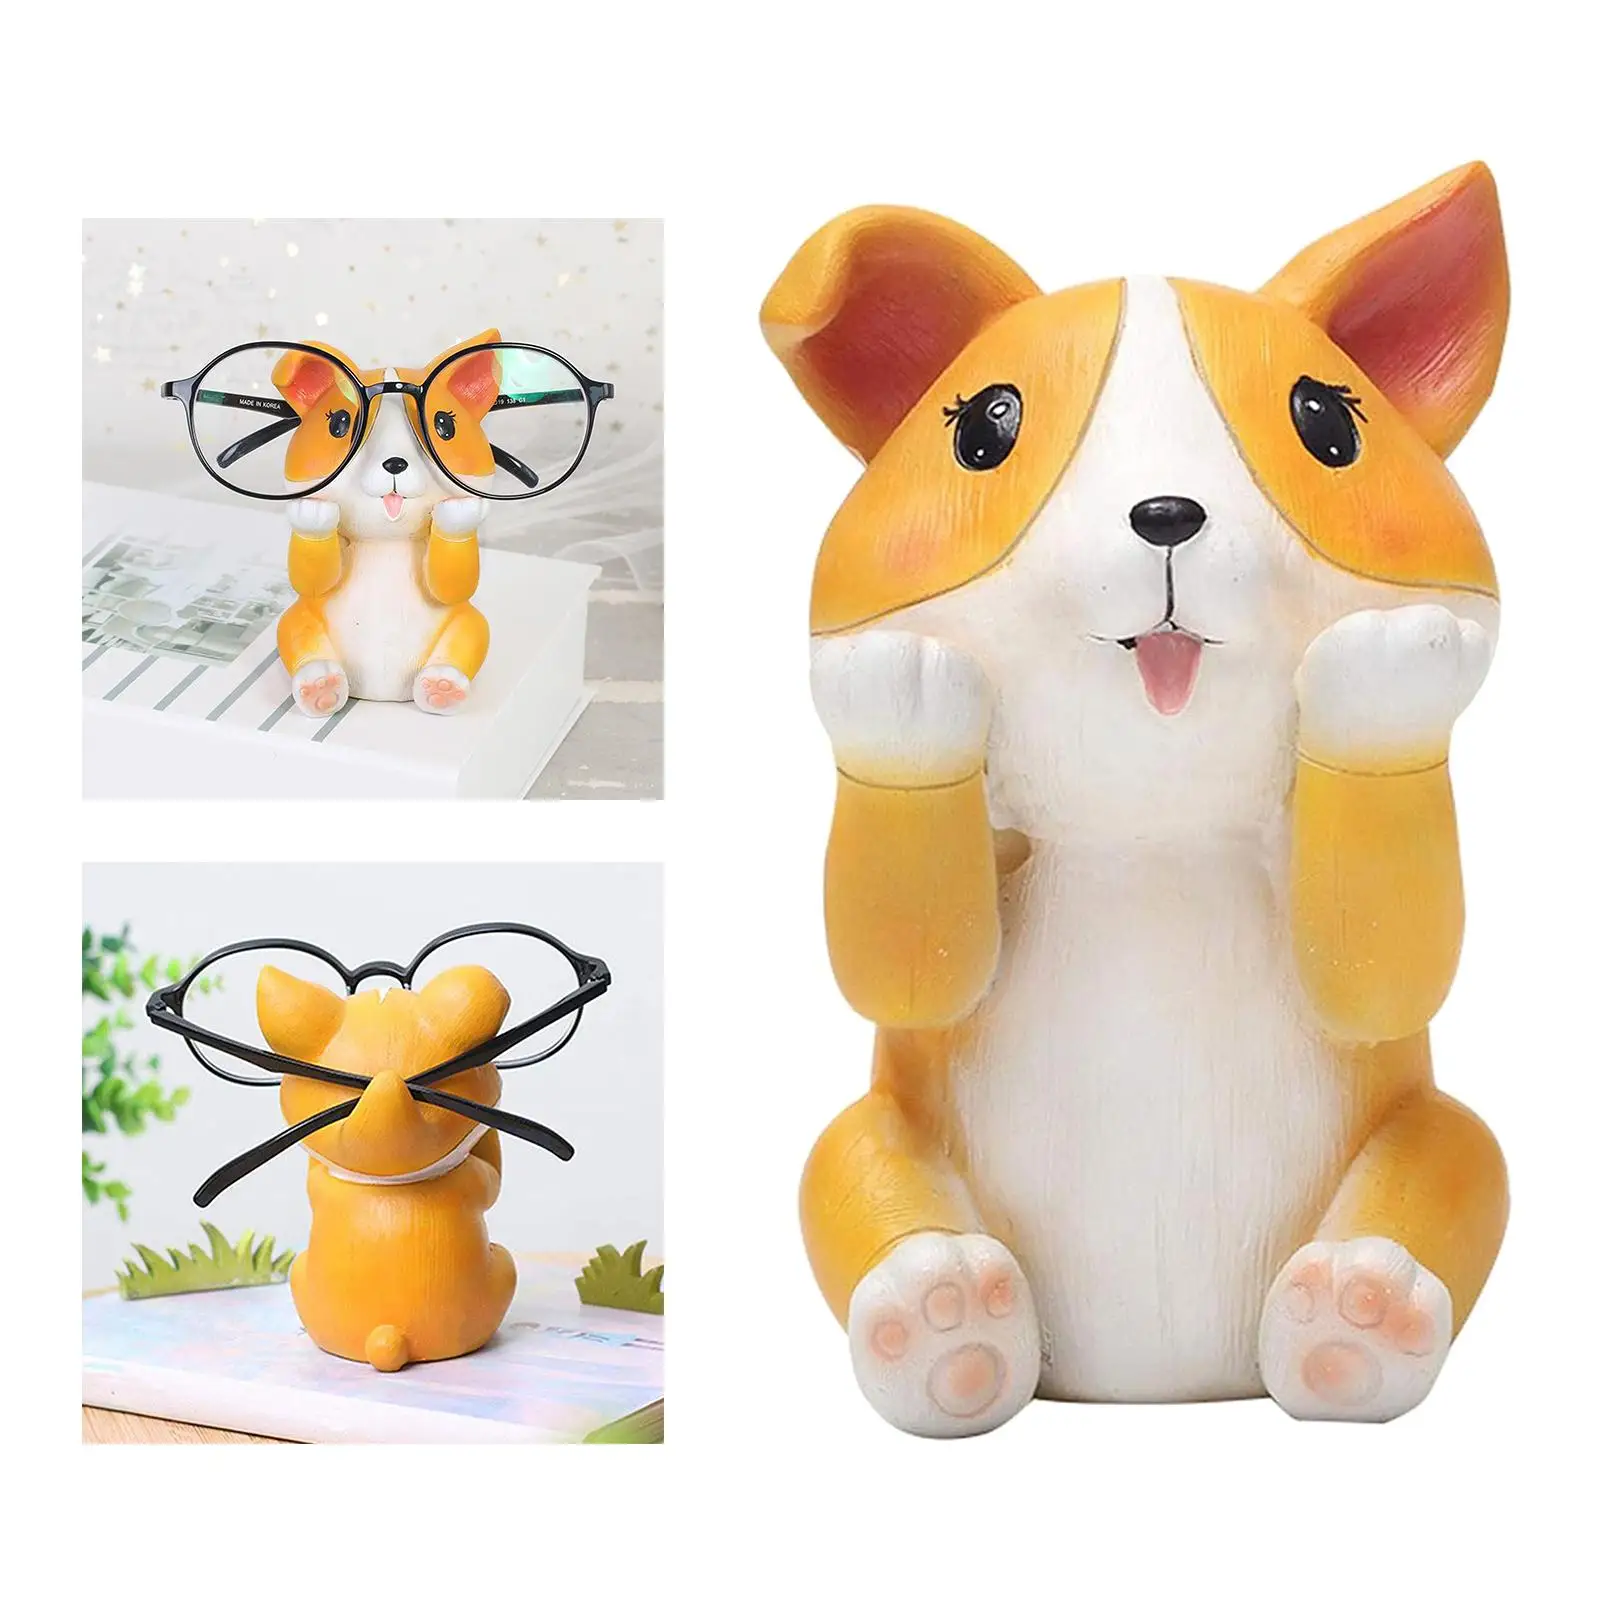 Resin Animal Eyeglasses Holder Stand Rack Spectacle Display Desktop Study Ornaments , Gifts for Birthday Baby Showers Souvenir